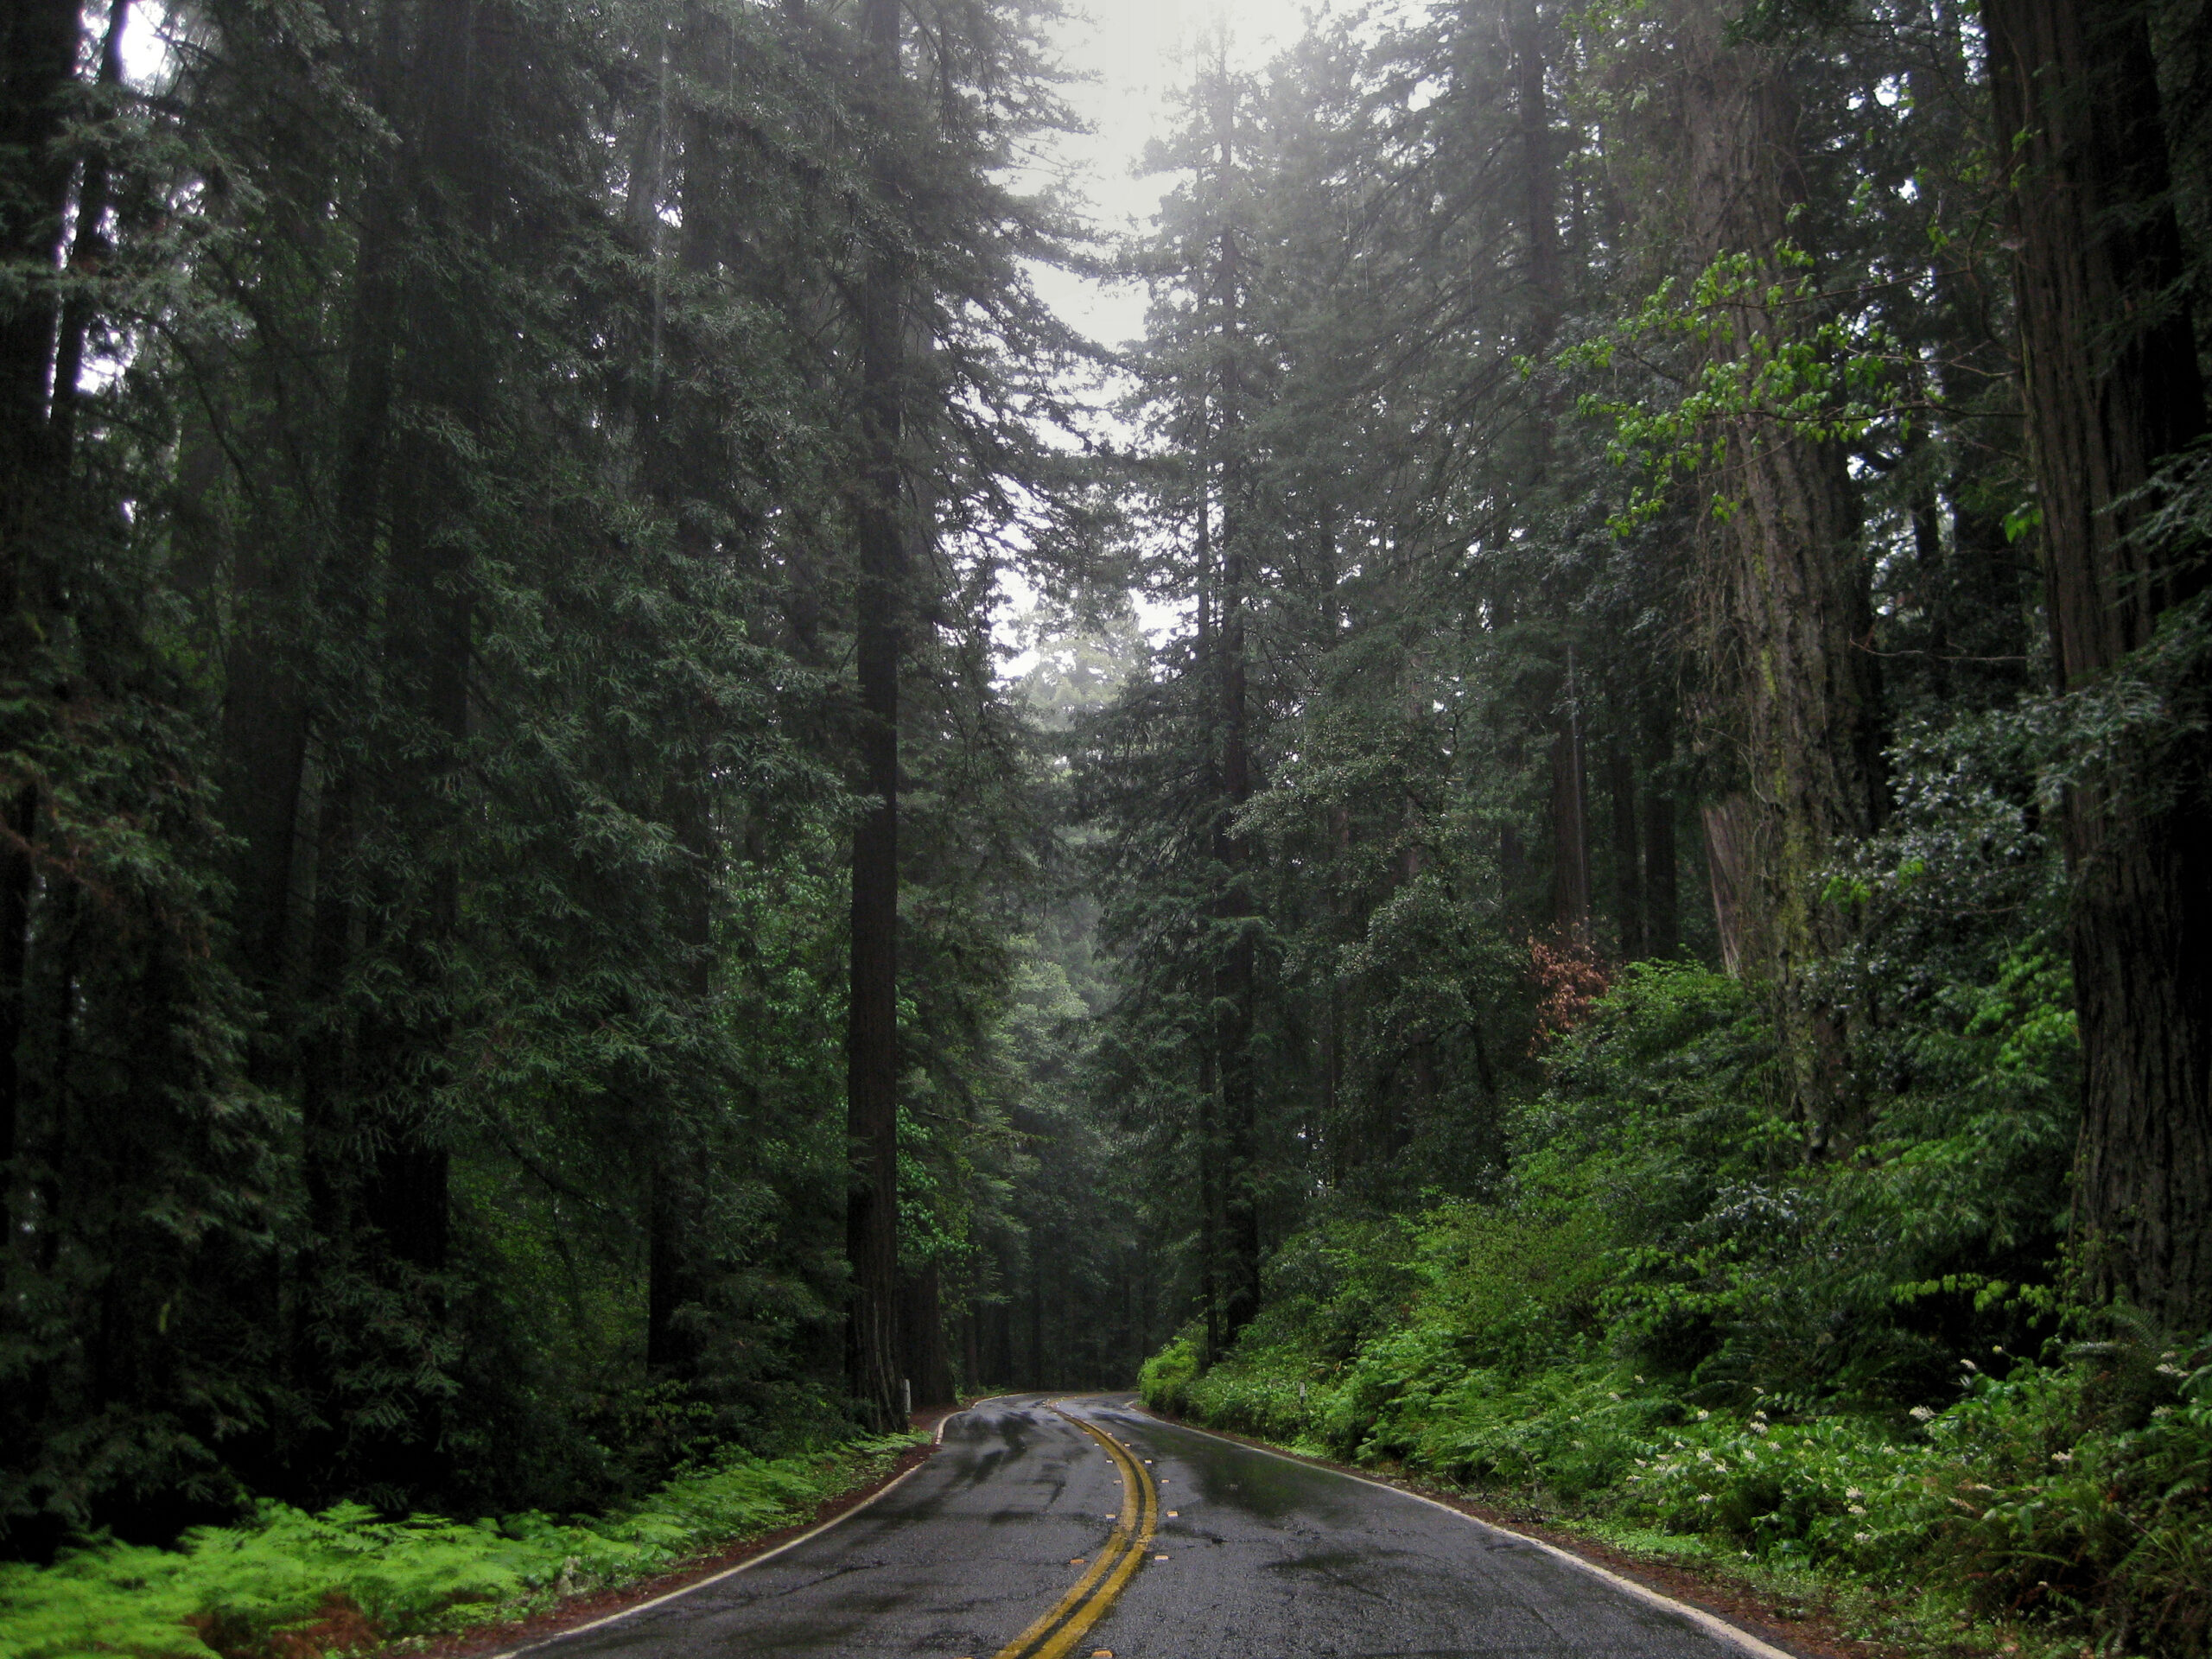 Pacific Coast Highway snakes through a Redwood forest in northern California.